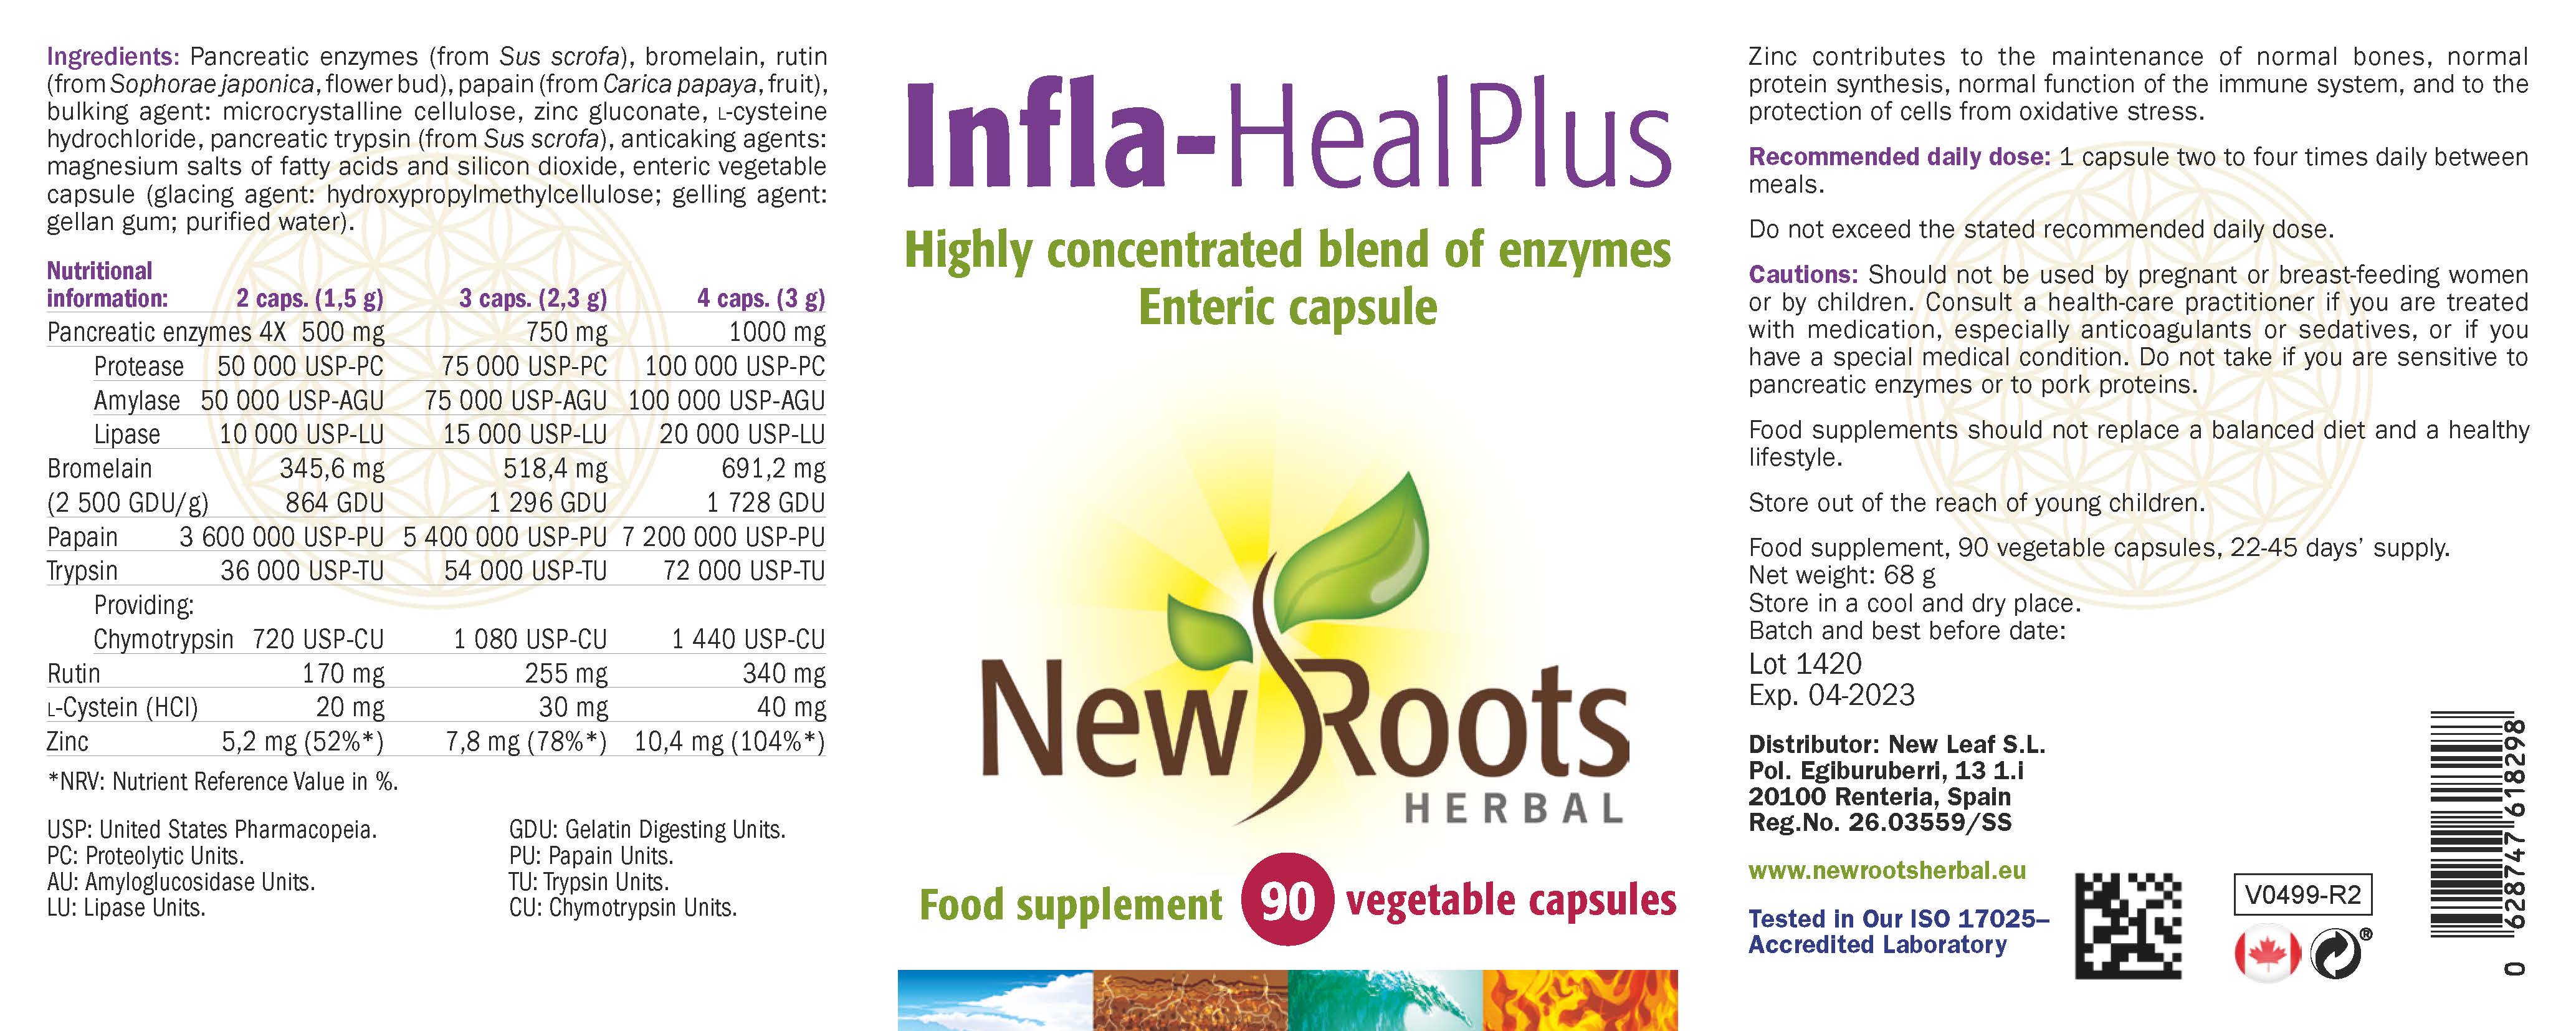 New Roots Herbal Infla-Heal Plus 90's